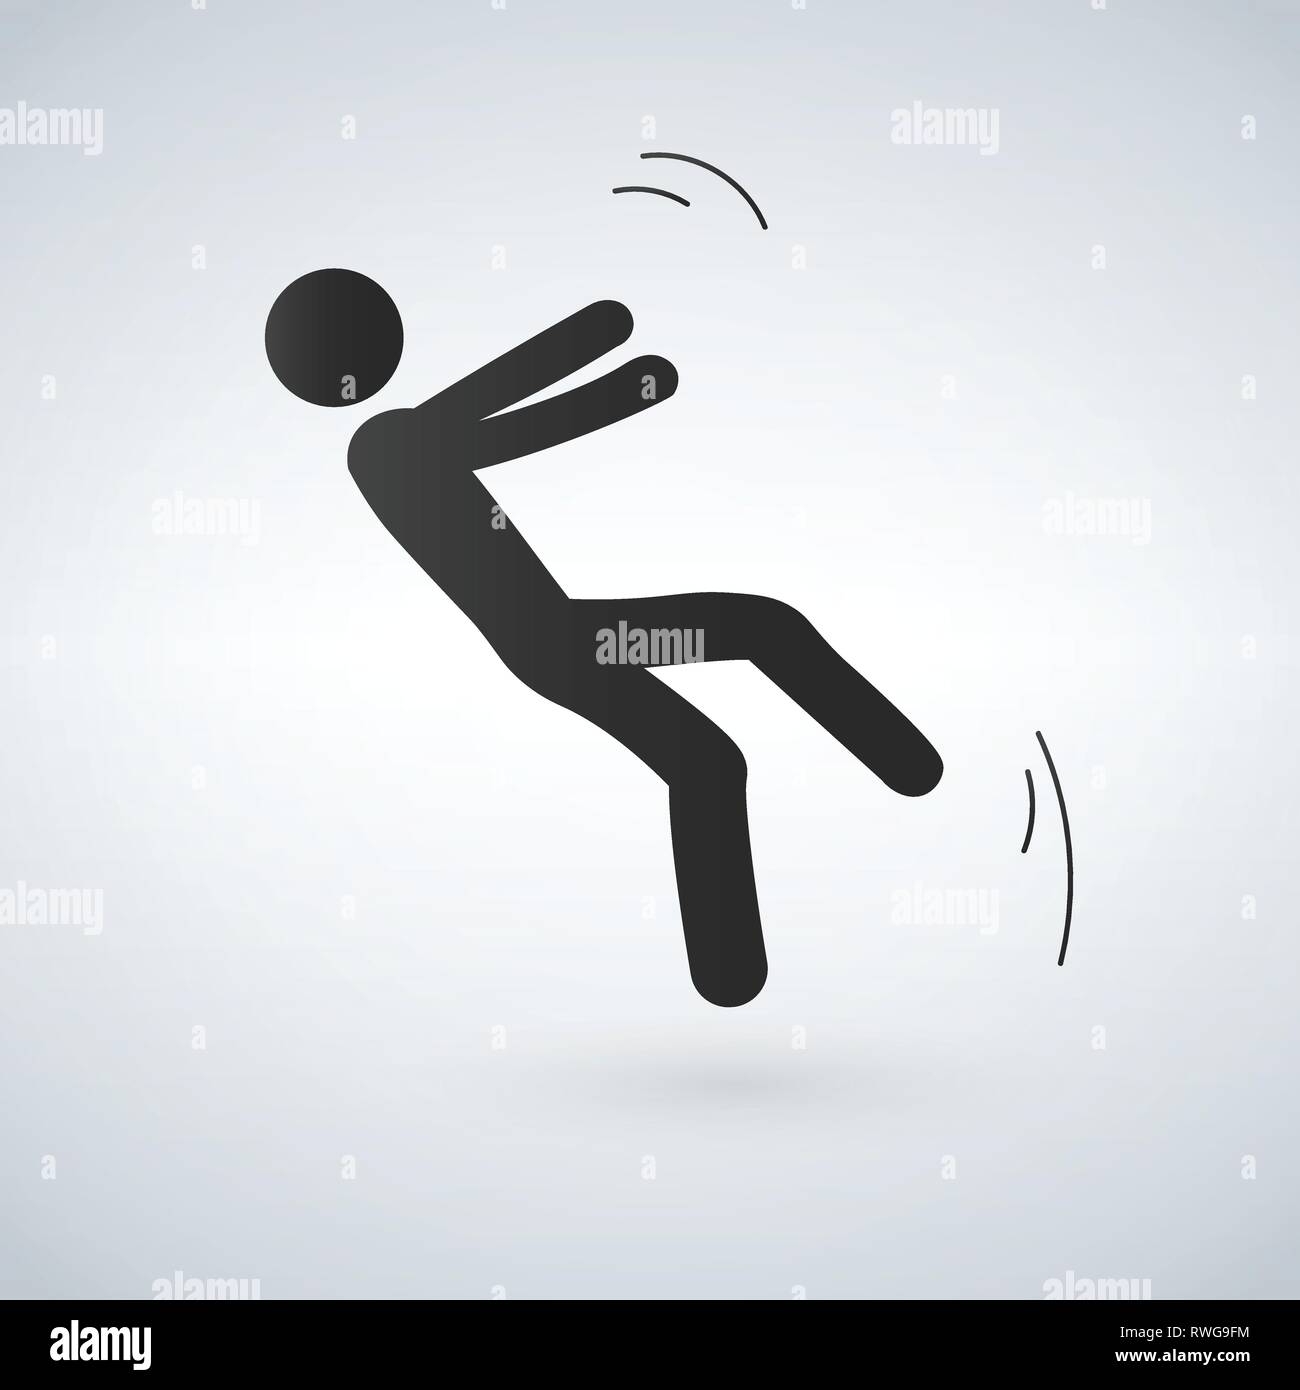 Falling person silhouette pictogram. Vector illustration on white background Stock Vector